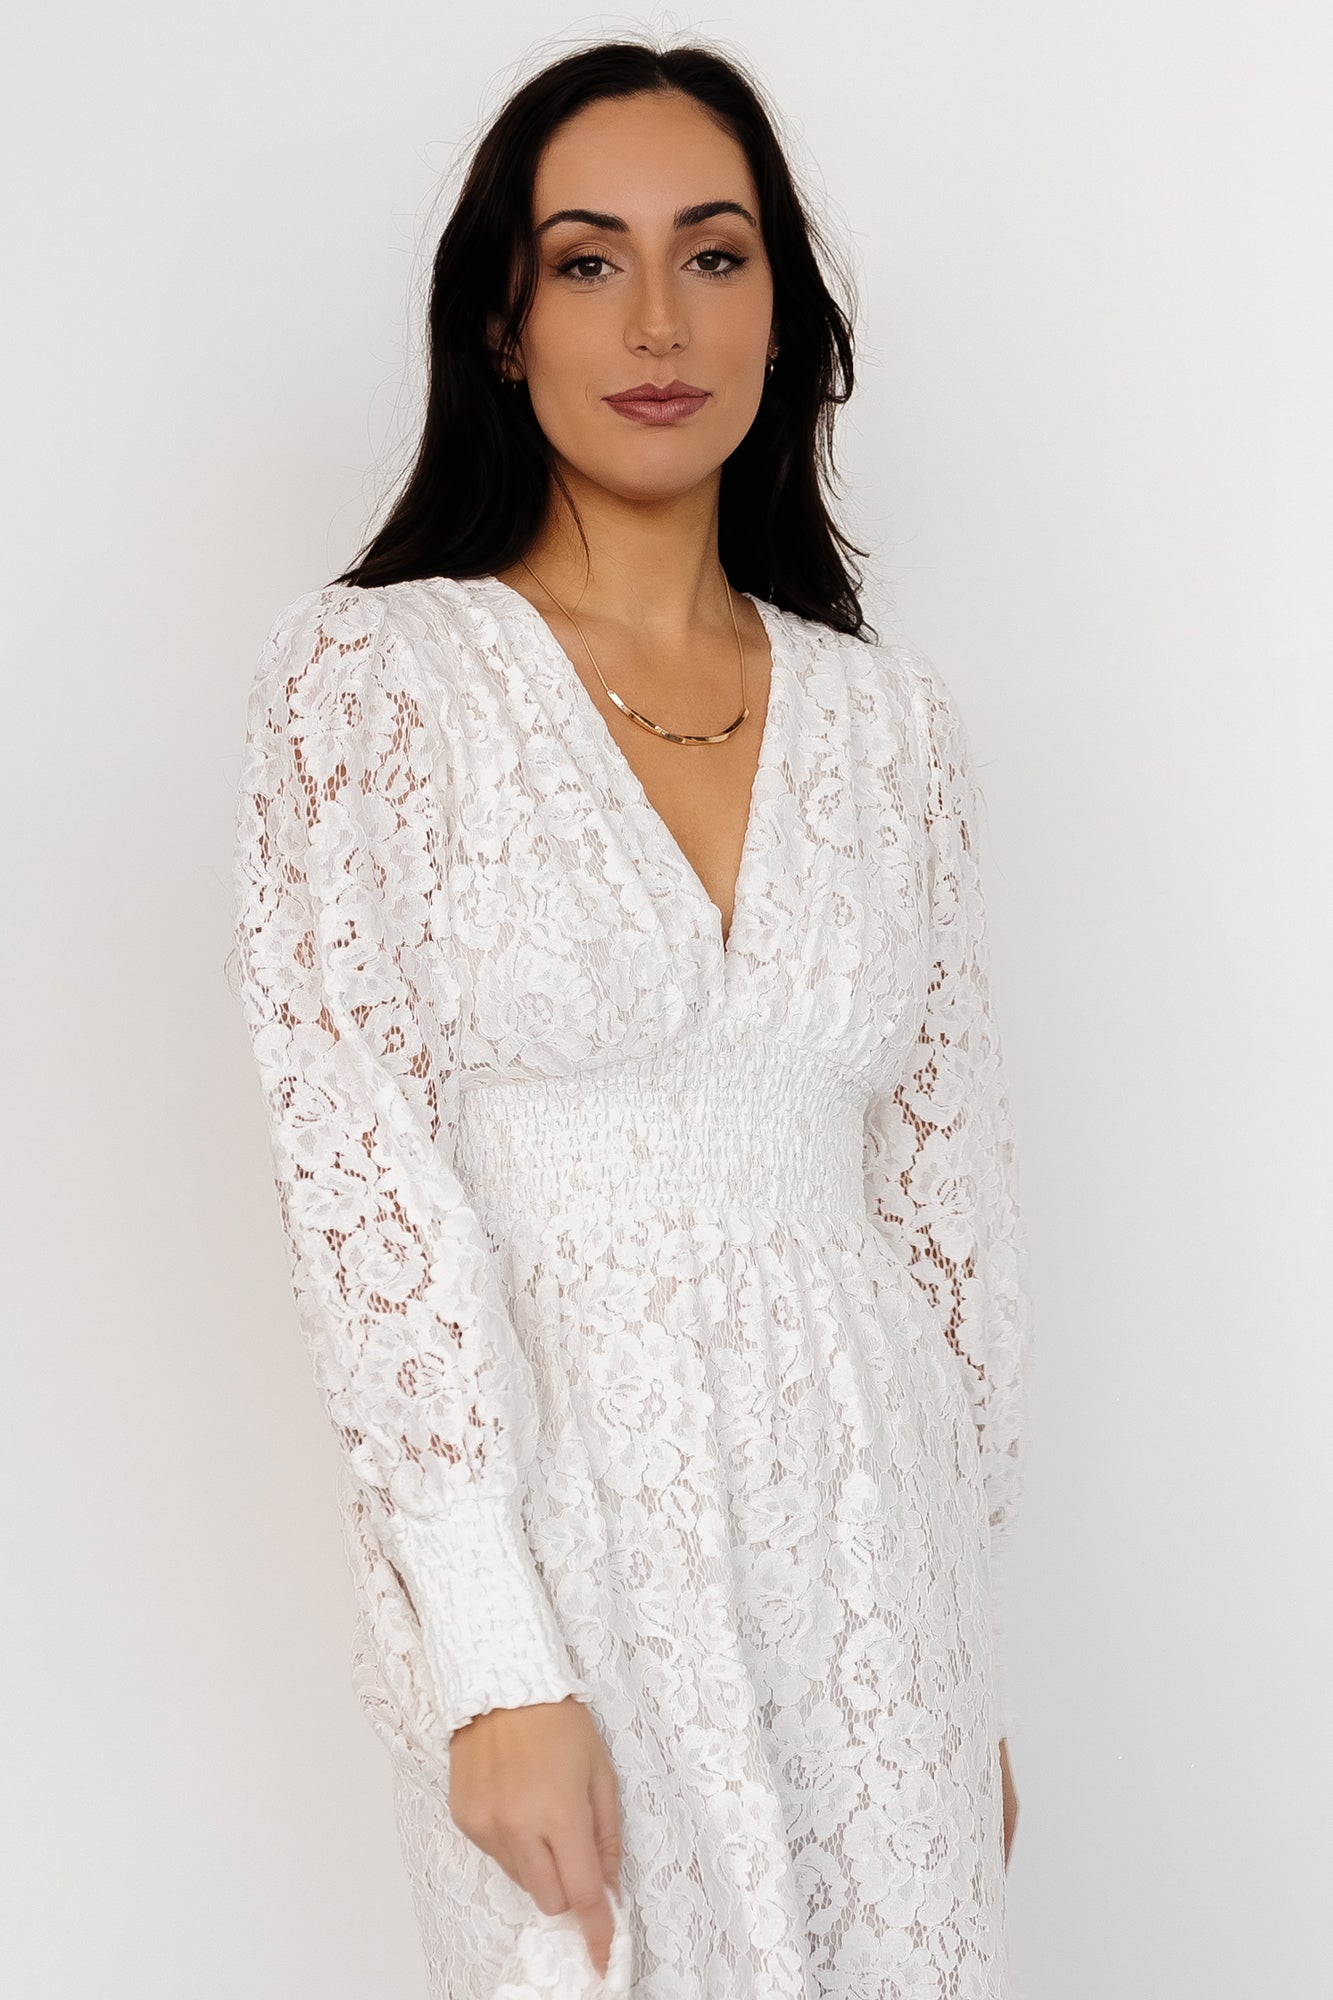 Best Women's Smocked Dress Options for Summer - Lizzie in Lace